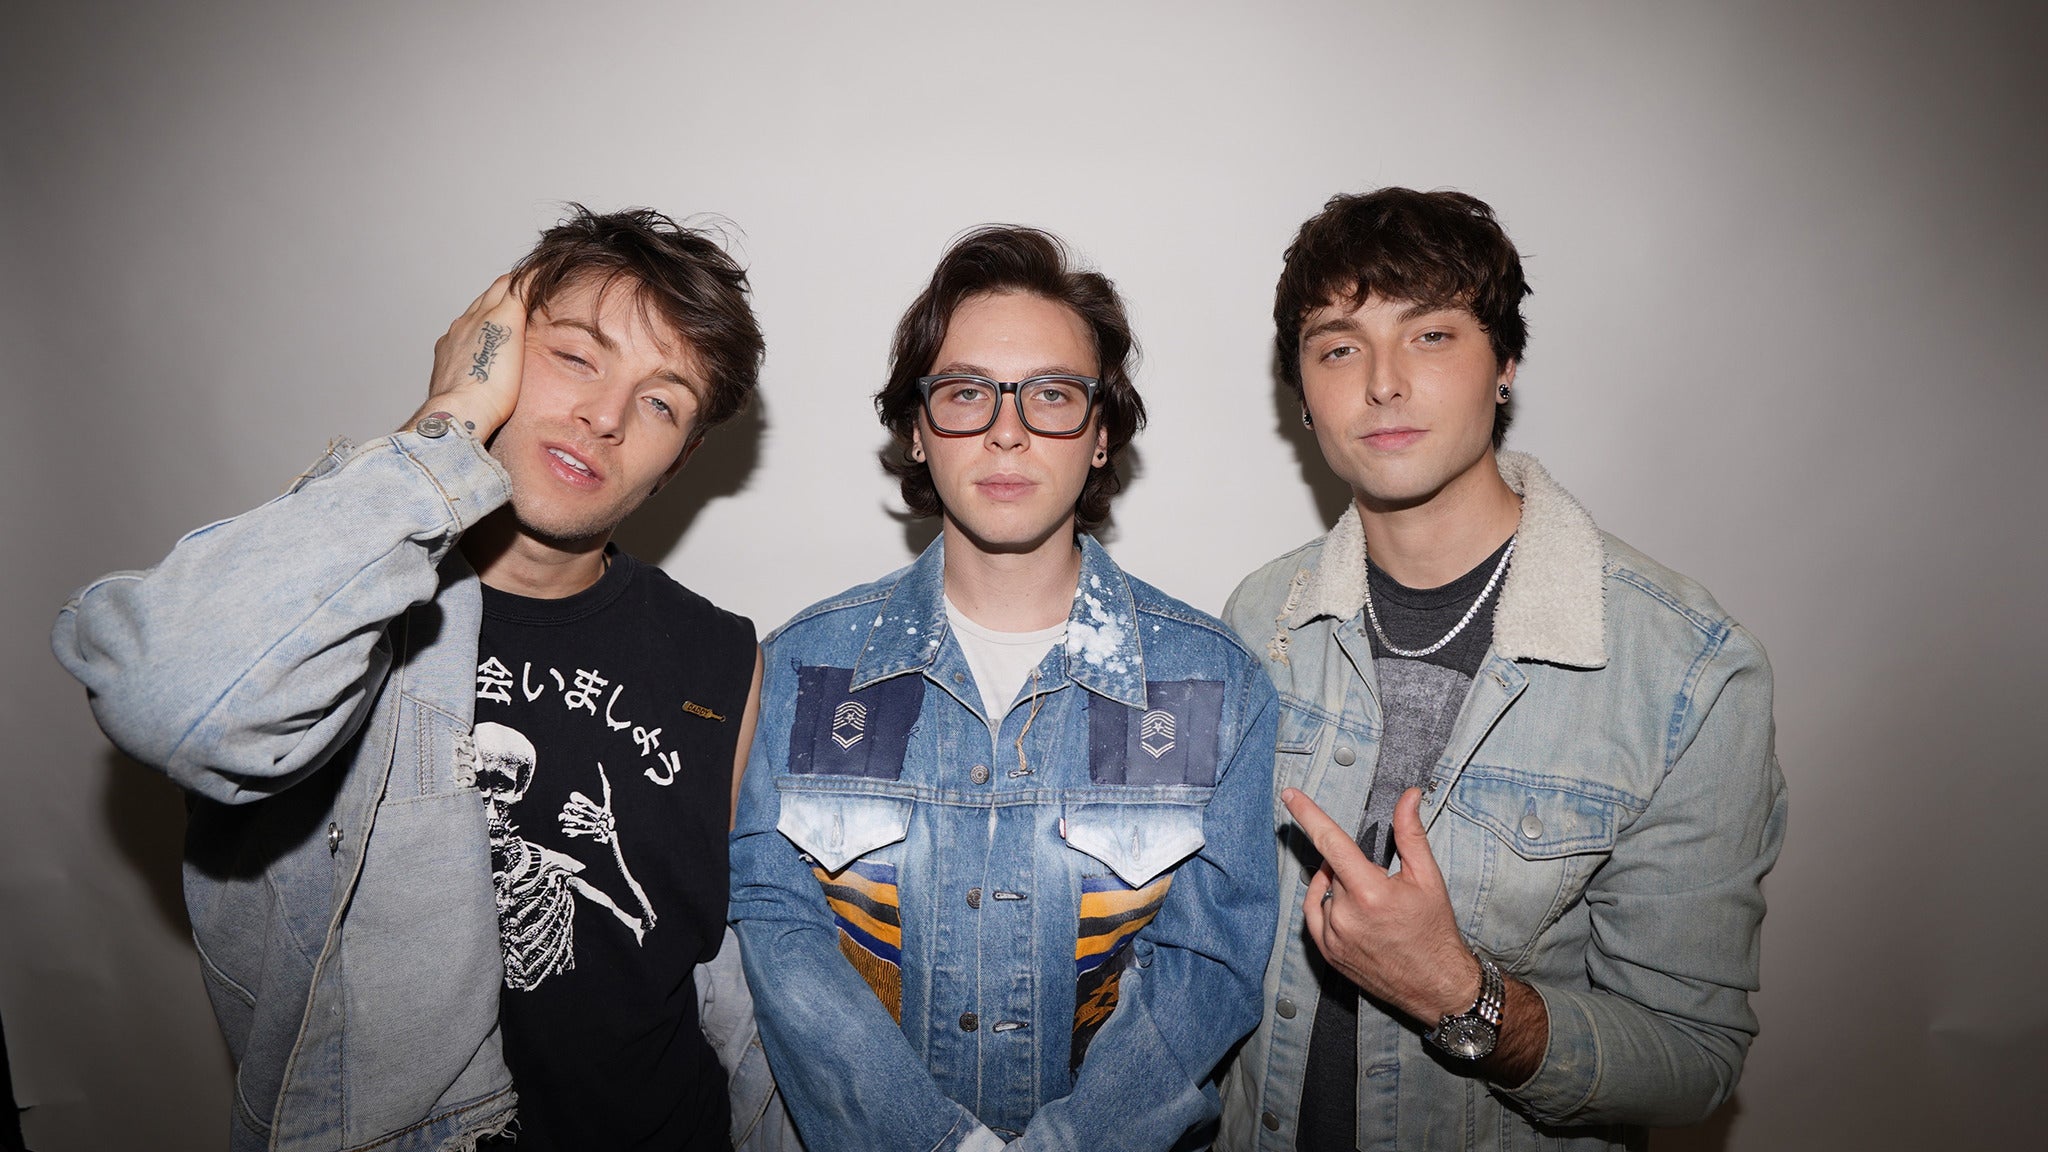 Emblem3 presale code for show tickets in Boston, MA (Brighton Music Hall presented by Citizens Bank)